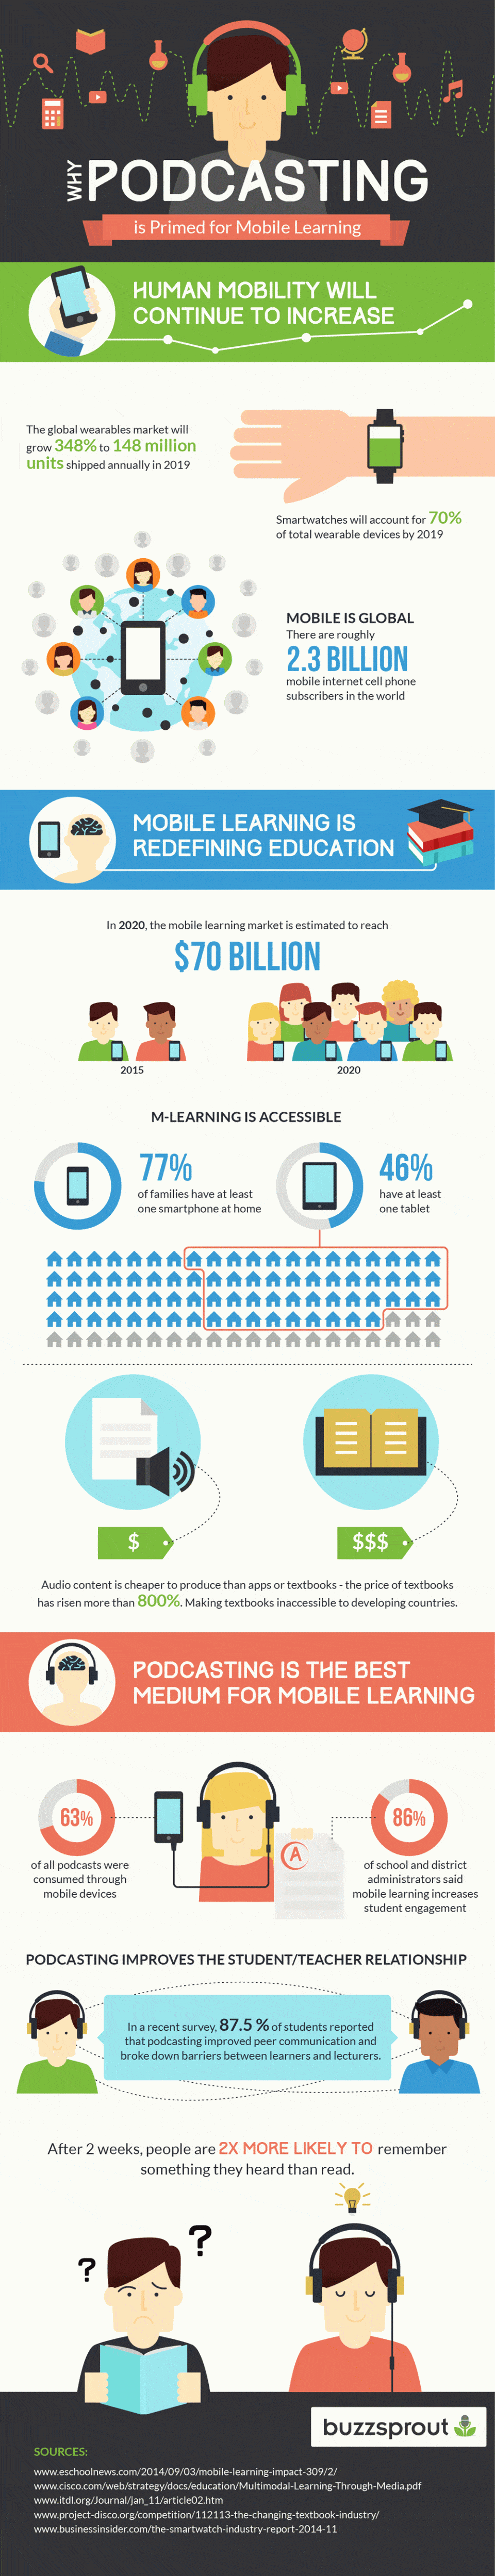 Why Podcasting Is Primed For Mobile Learning Infographic